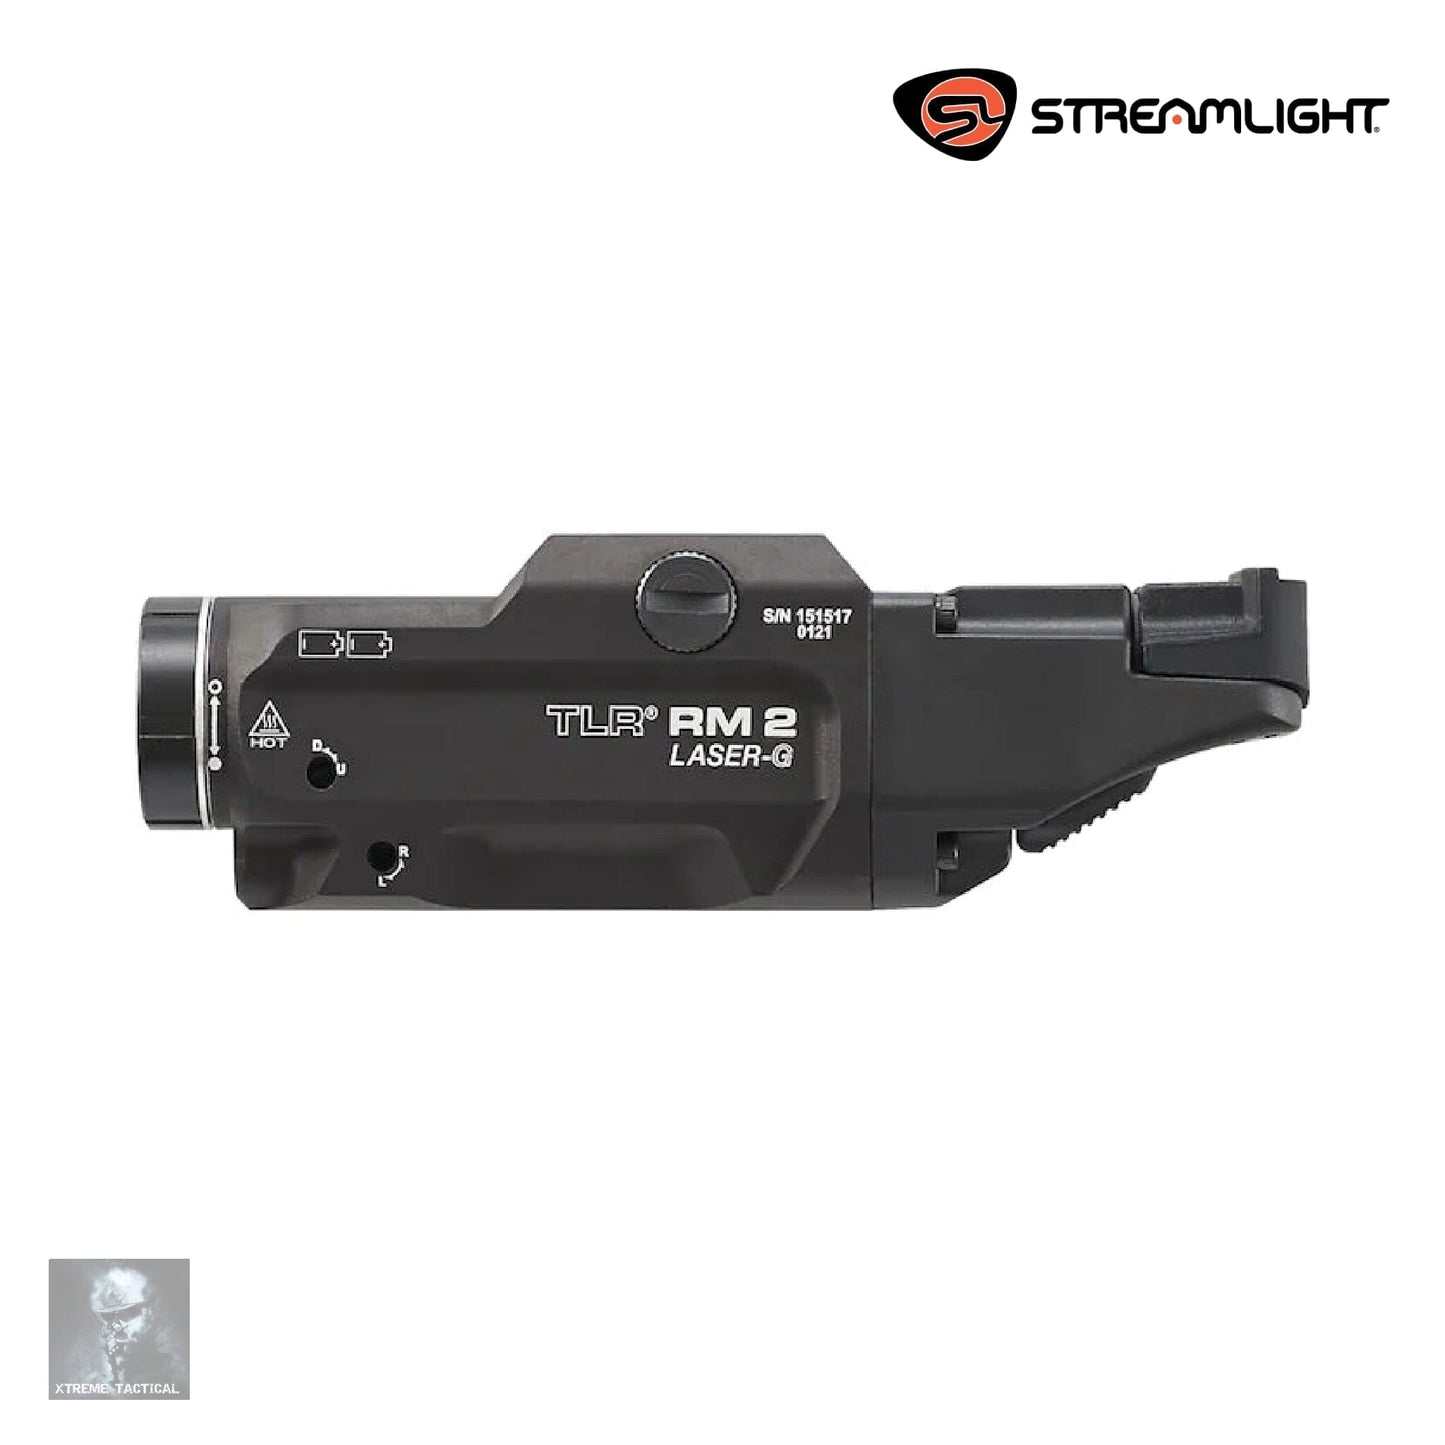 Streamlight TLR RM 2 Weapon Light with Green Laser - 69454 Weapon Light Streamlight 